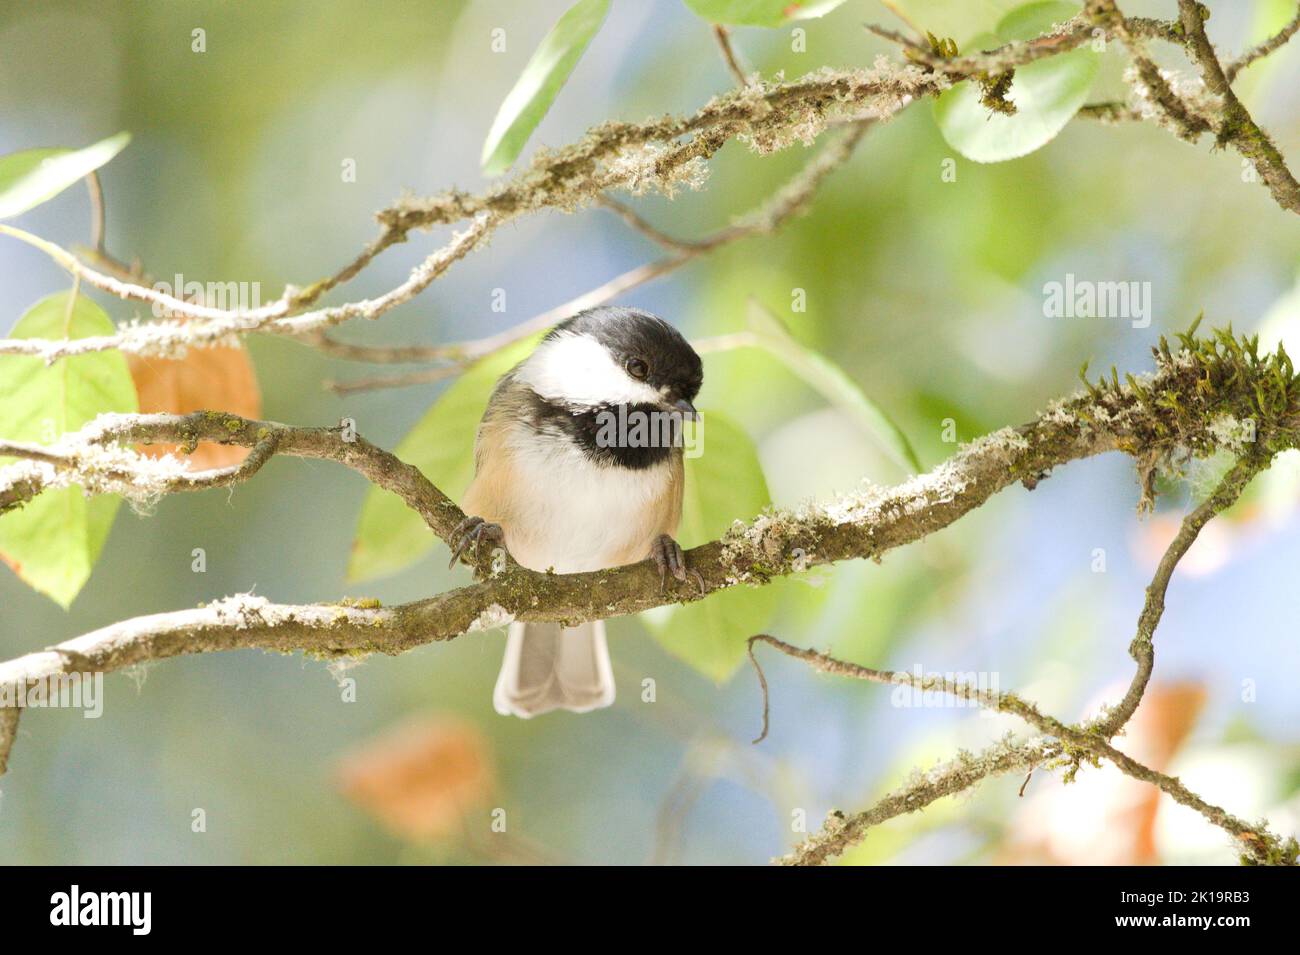 A black-capped chickadee looking curiously at the camera while sitting on a tree against a backdrop of green leaves. Stock Photo